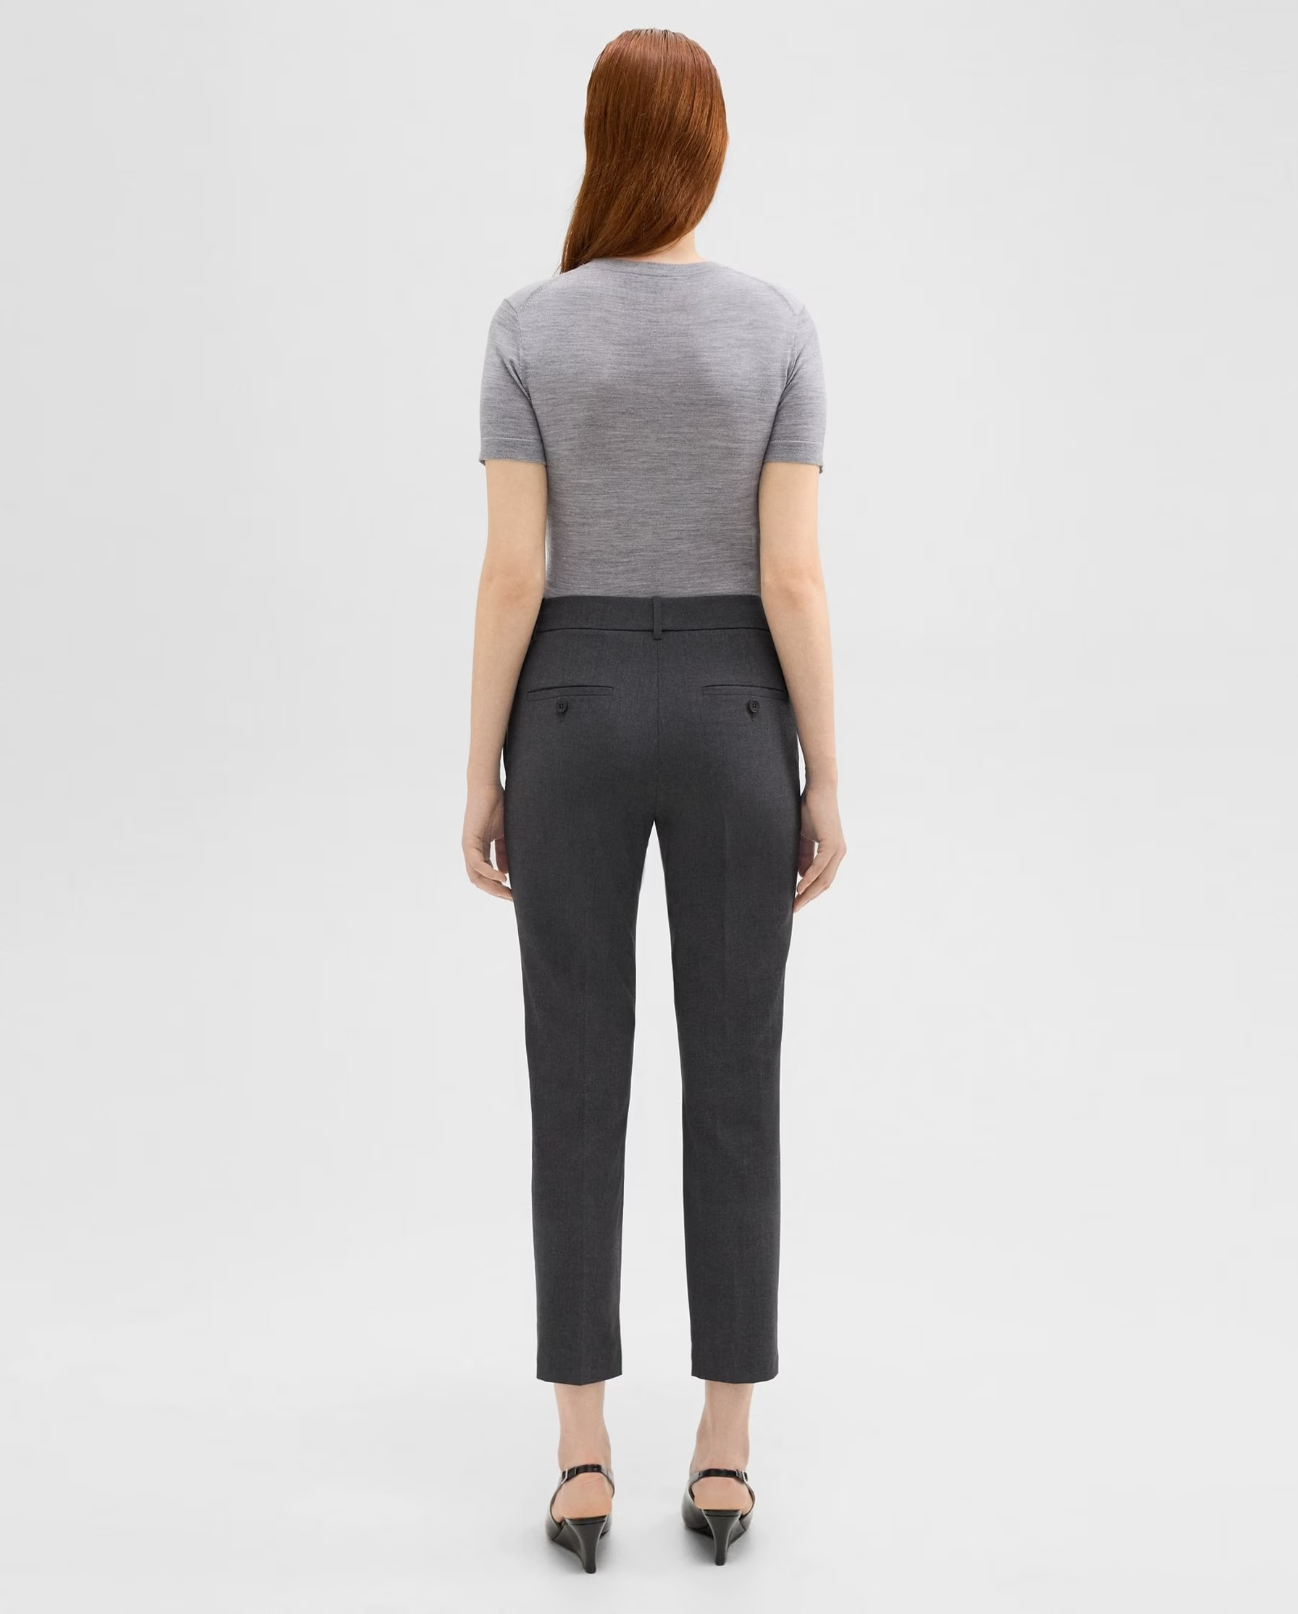 women's trouser pant in charcoal